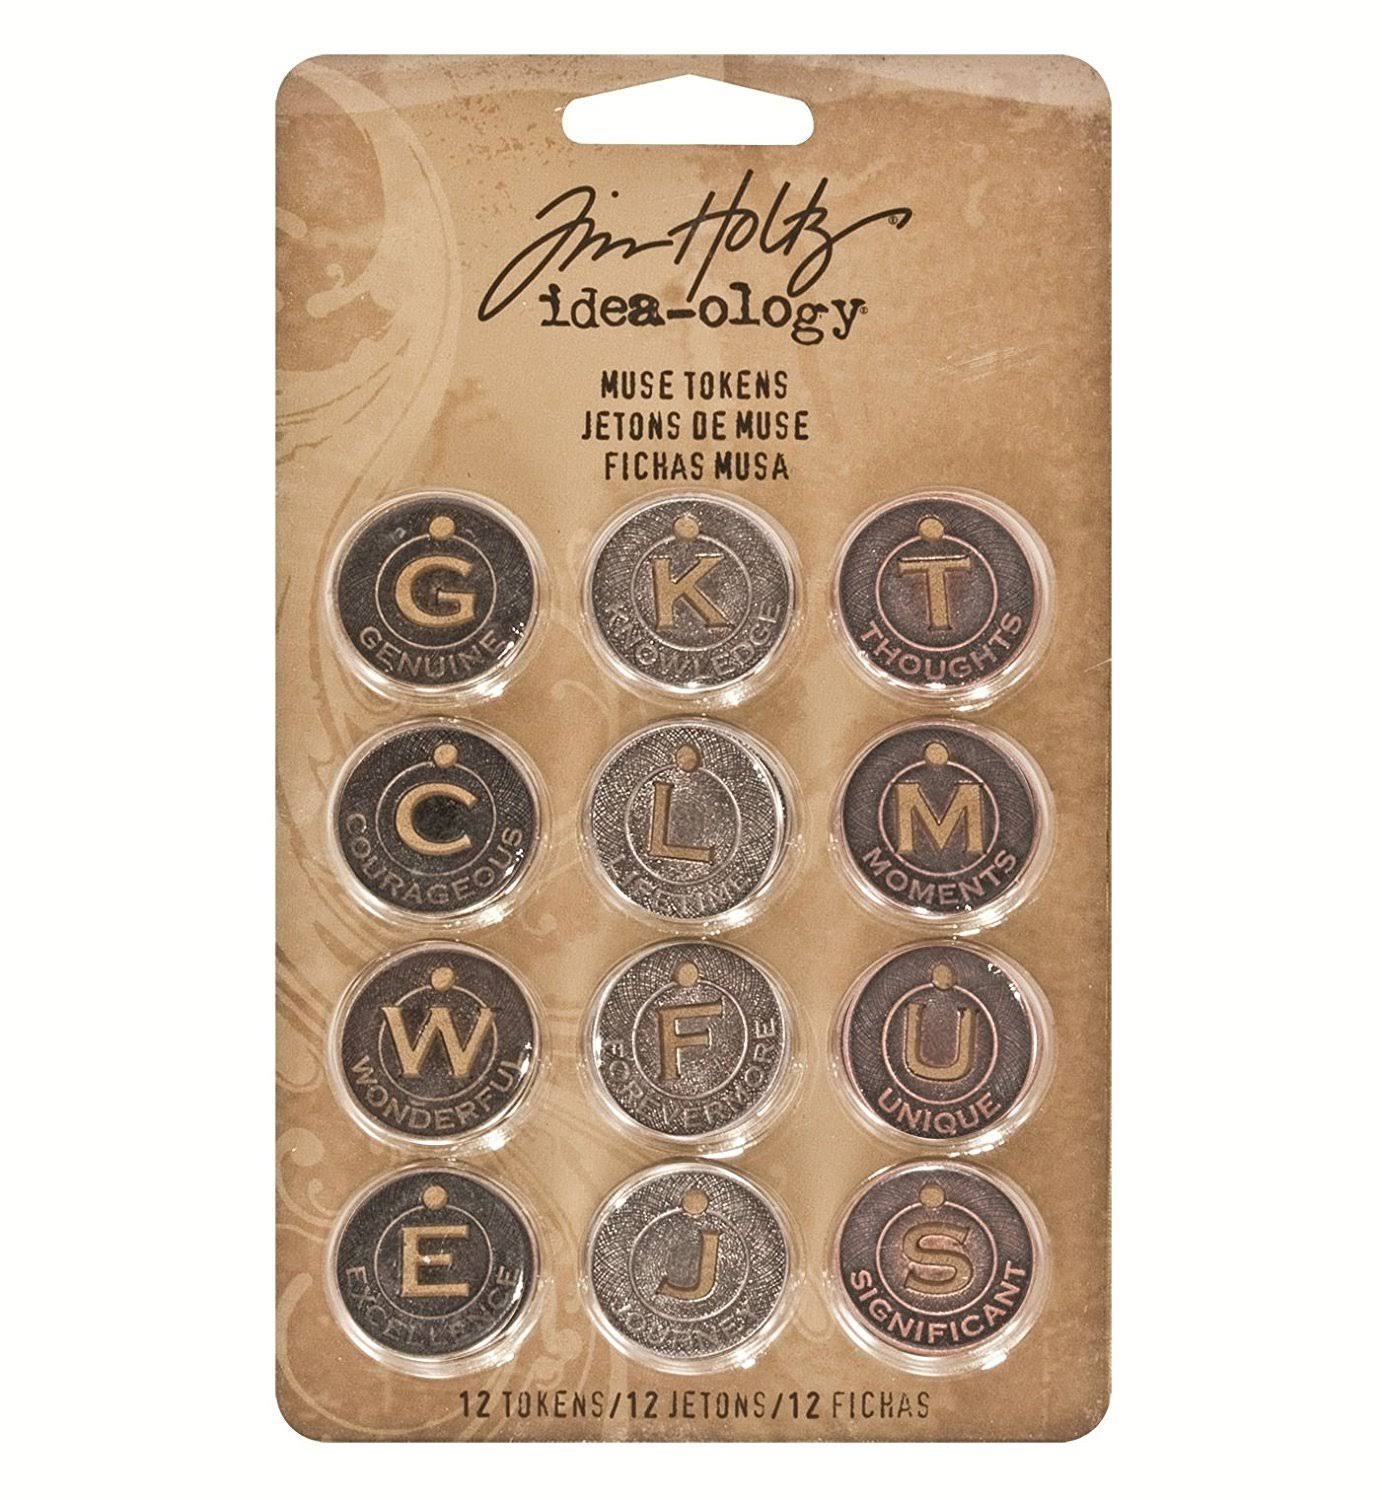 Tim Holtz Idea-ology Muse Tokens